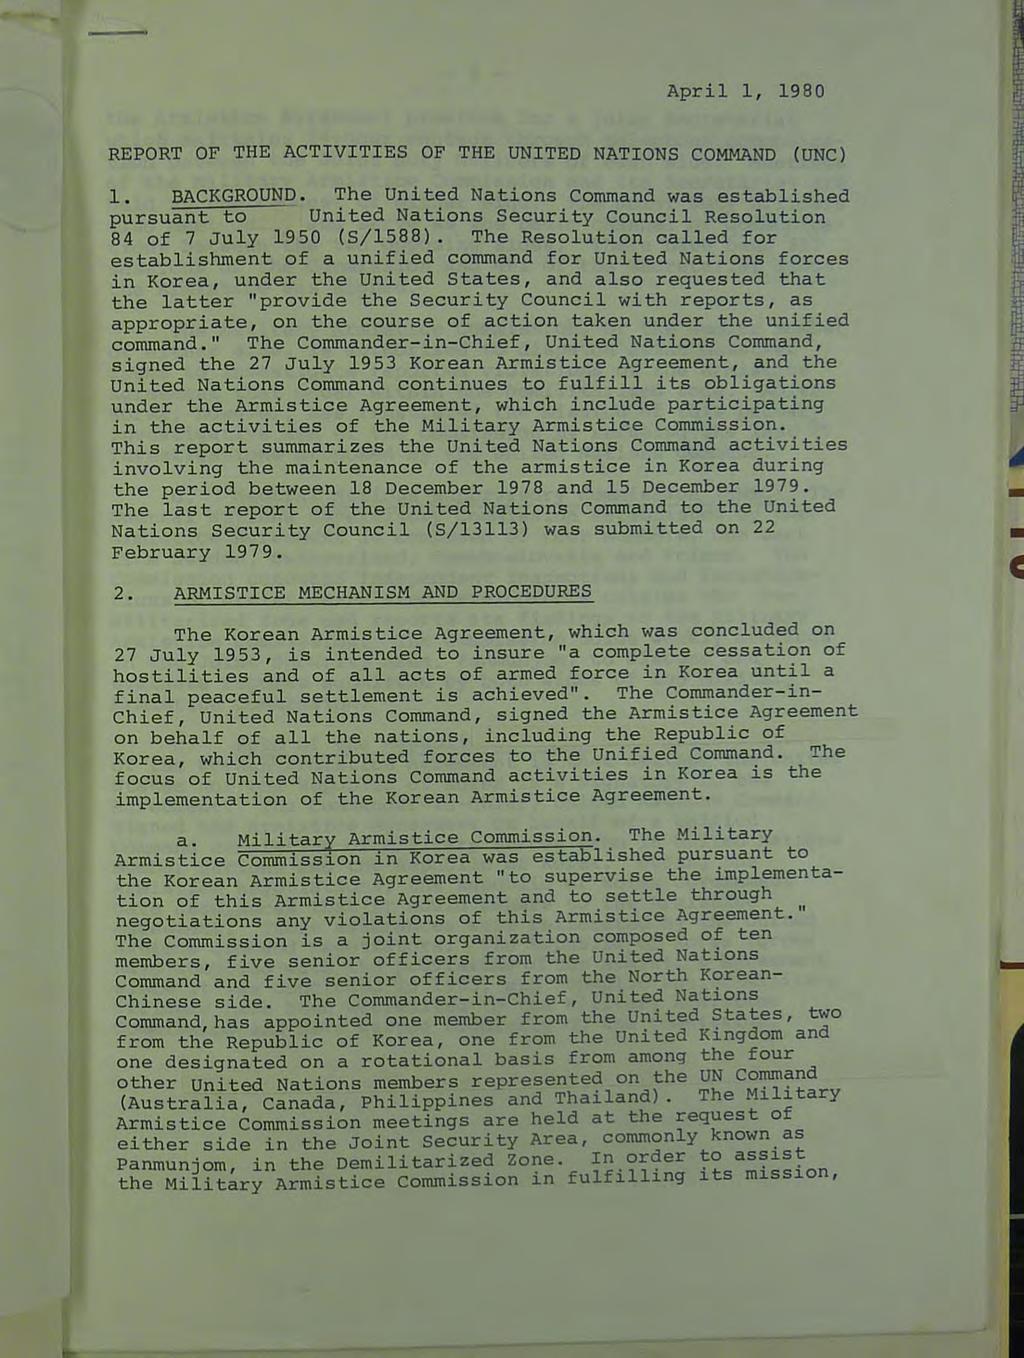 April 1, 1980 REPORT OF THE ACTIVITIES OF THE UNITED NATIONS COMMAND (UNC) 1. BACKGROUND.